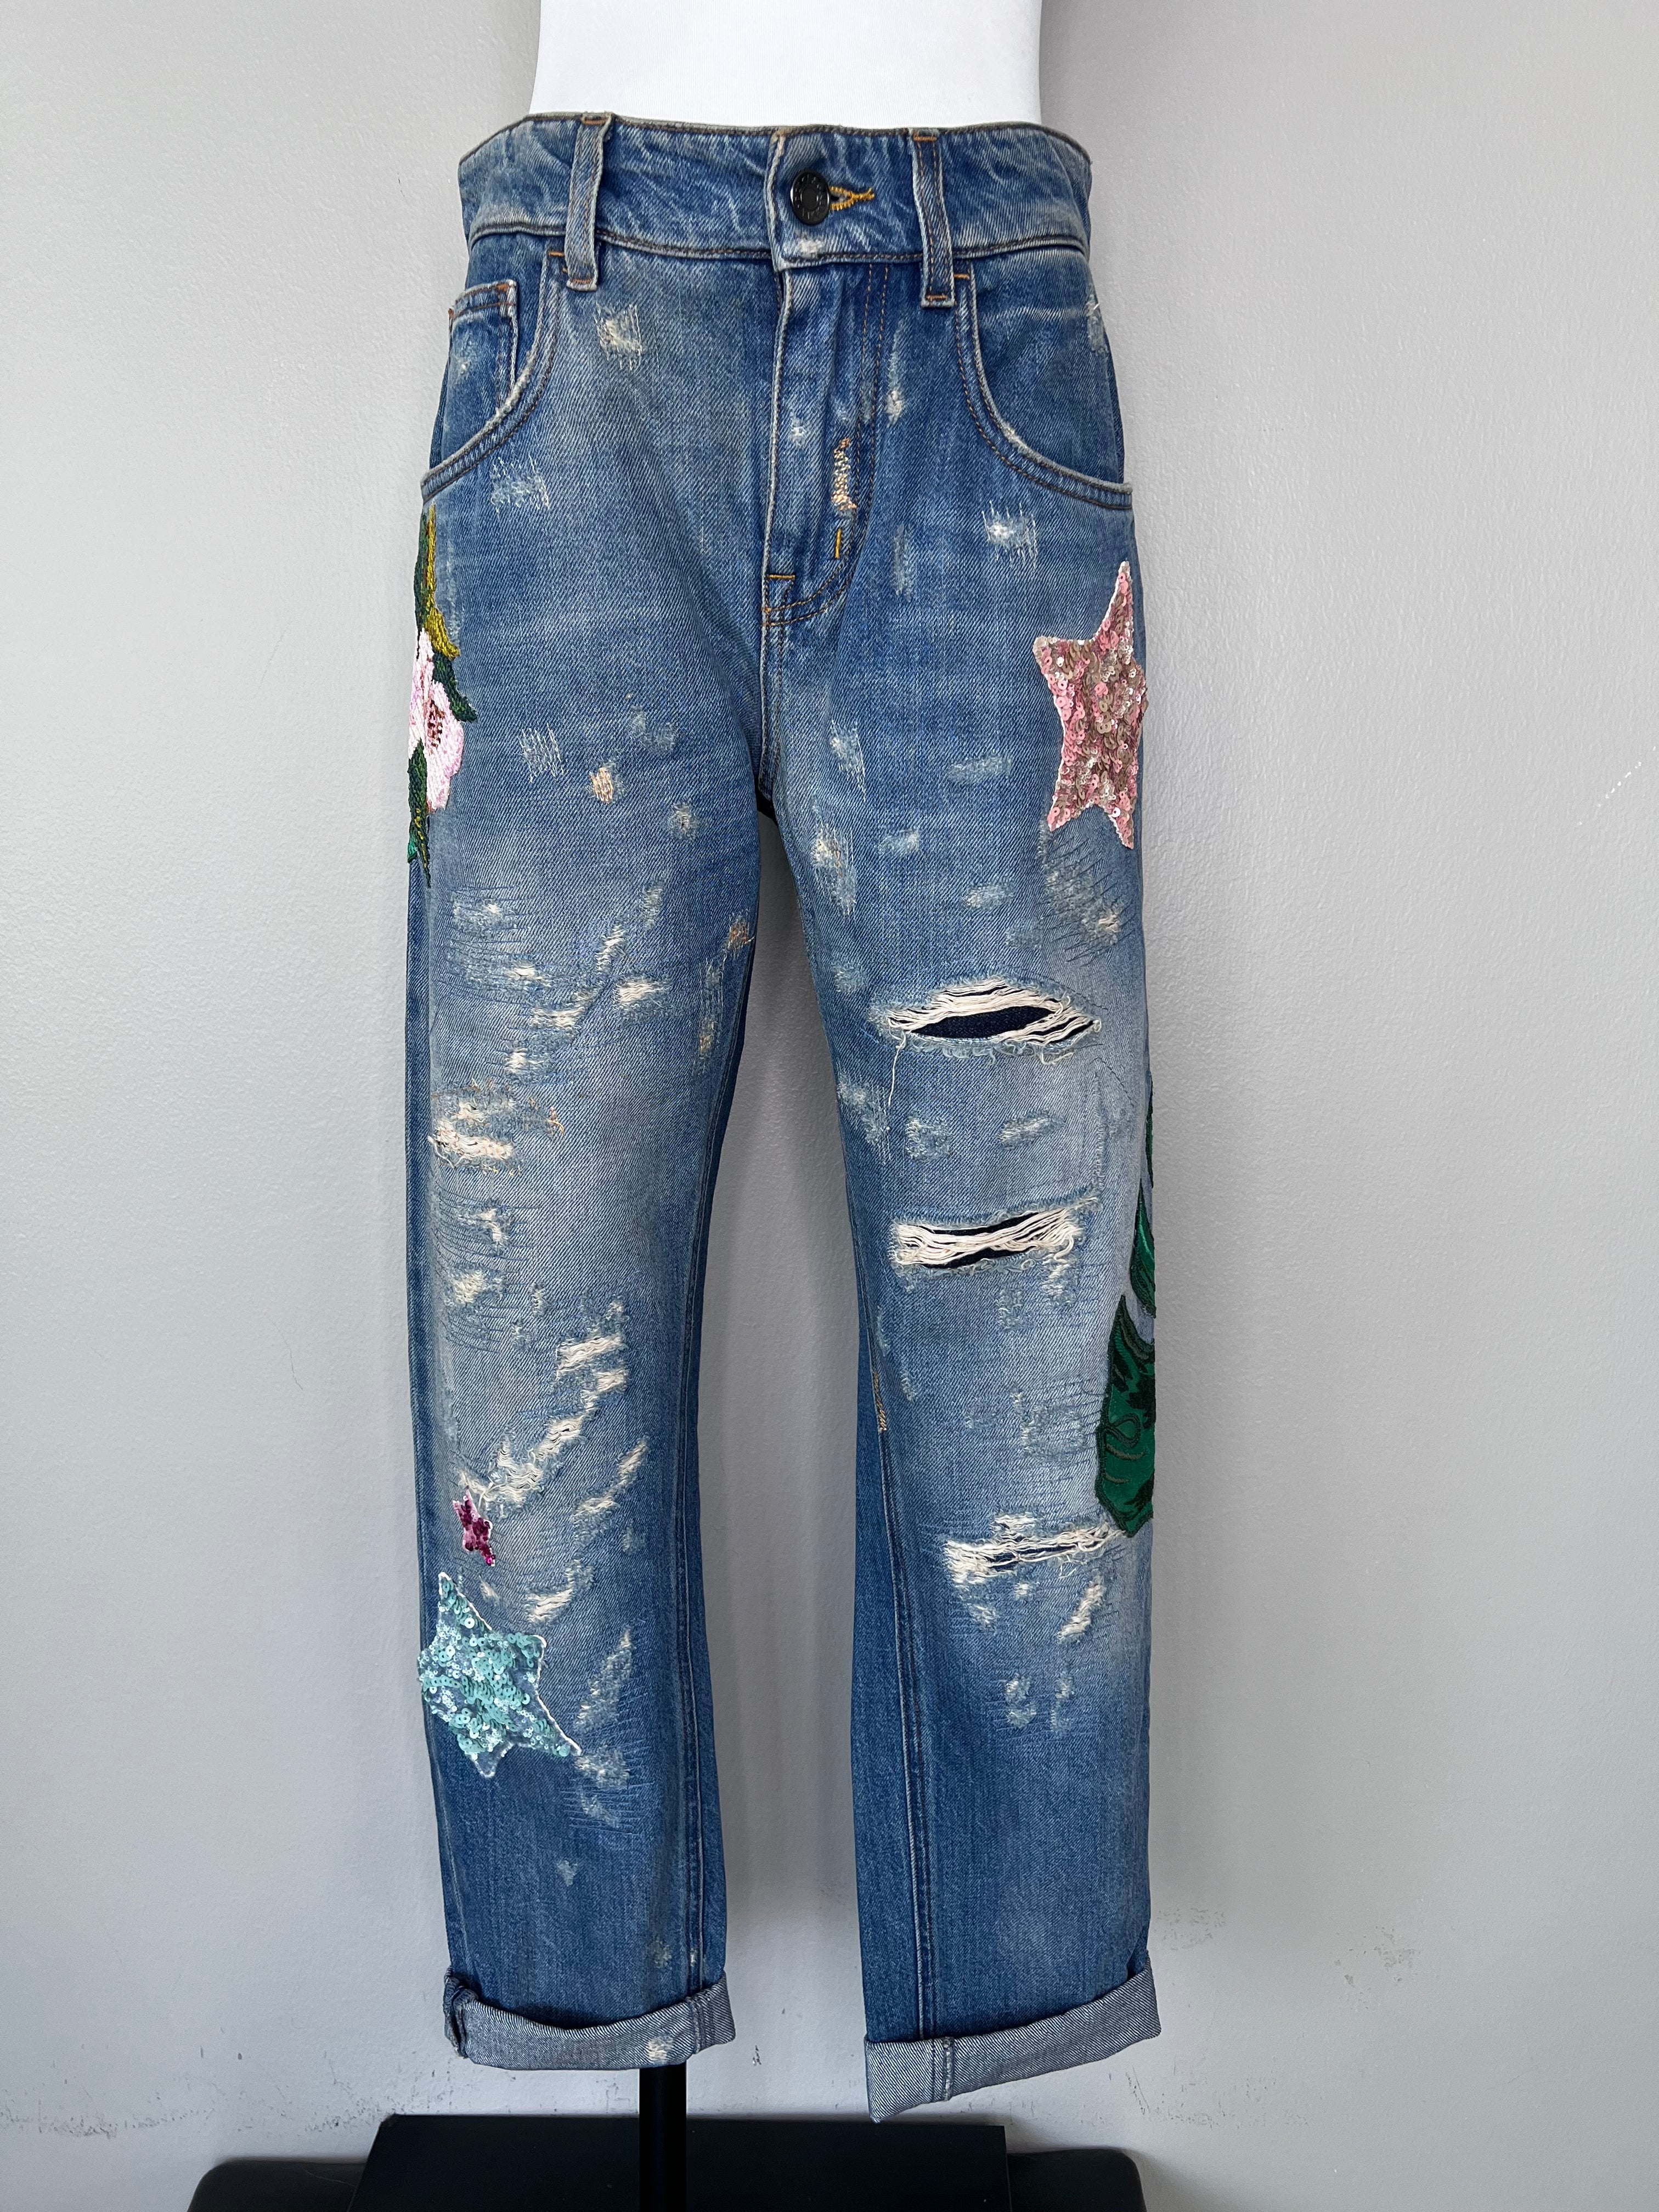 Blue patchwork design jeans with ripped knees - DOLCE & GABBANA